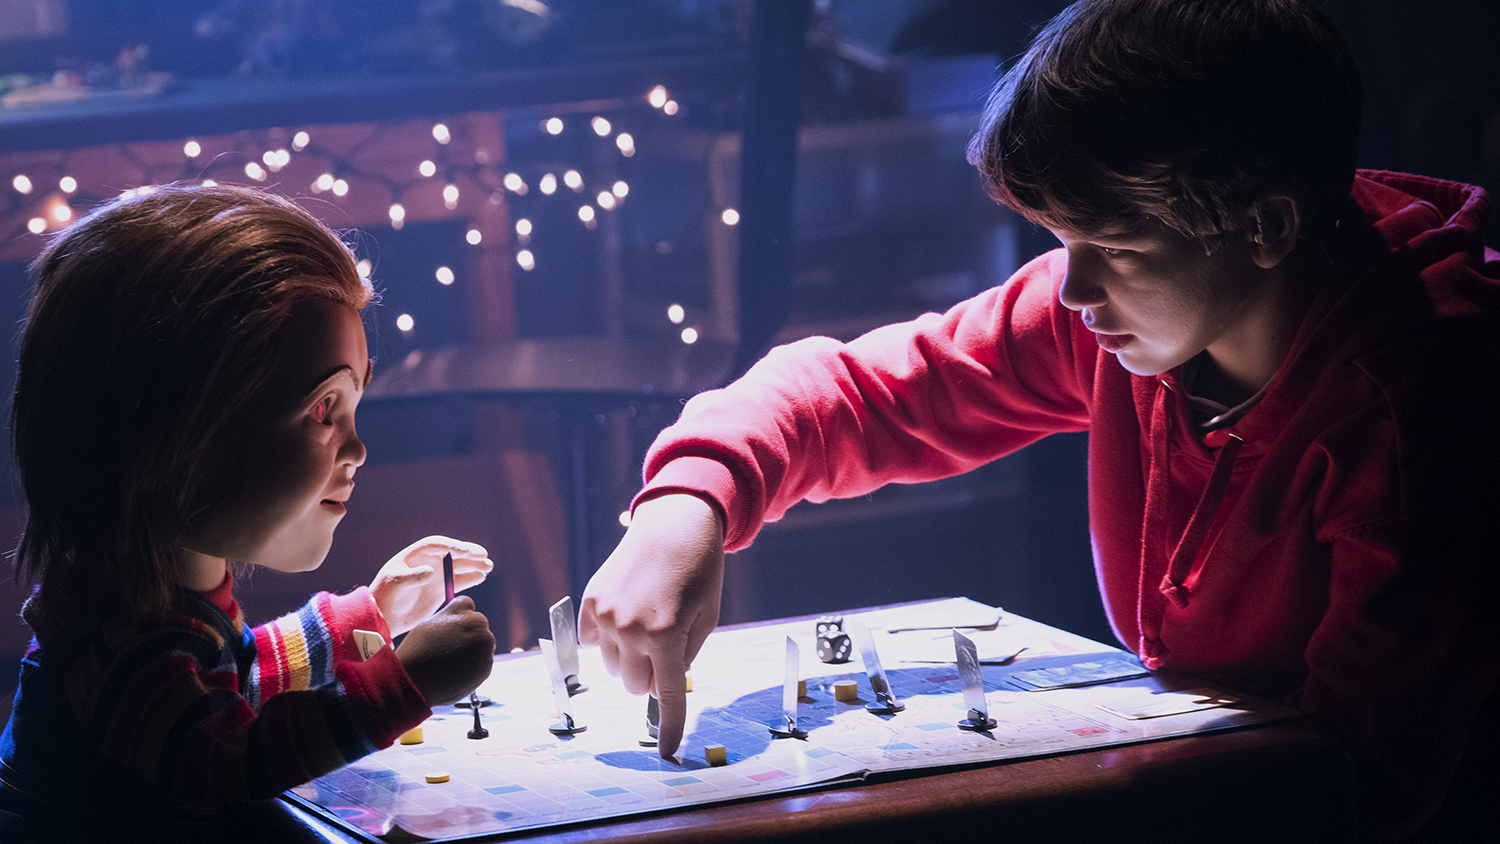 ‘Child’s Play’; This good-bad ’80s horror-movie reboot from the producers of ‘It’ sends mixed messages, blending kid-targeted storytelling tropes with hard-R violence inappropriate for young viewers.